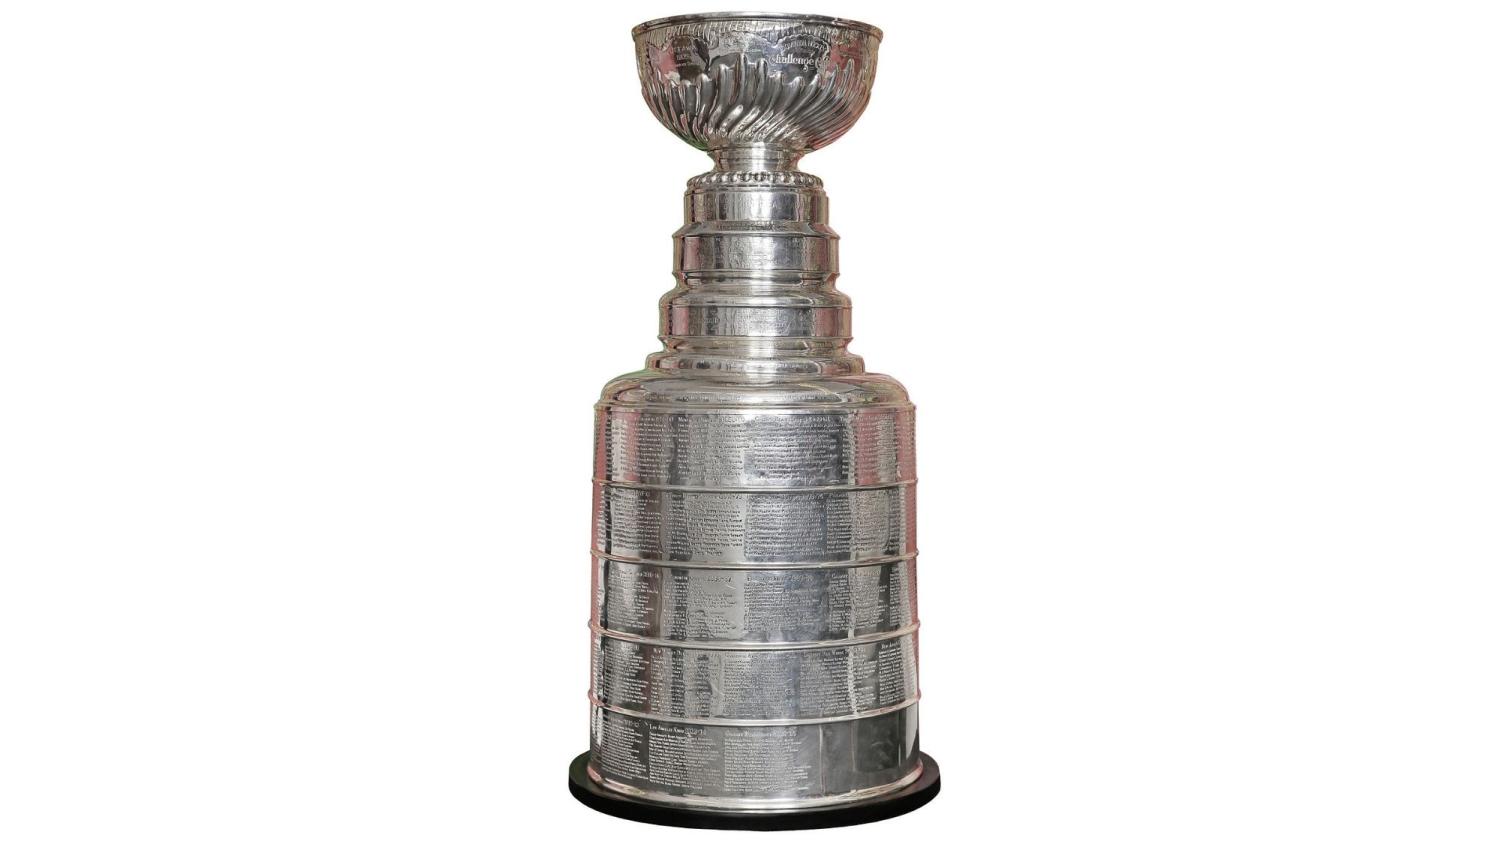 Meet every Jewish name that has ever been inscribed on NHL’s Stanley Cup